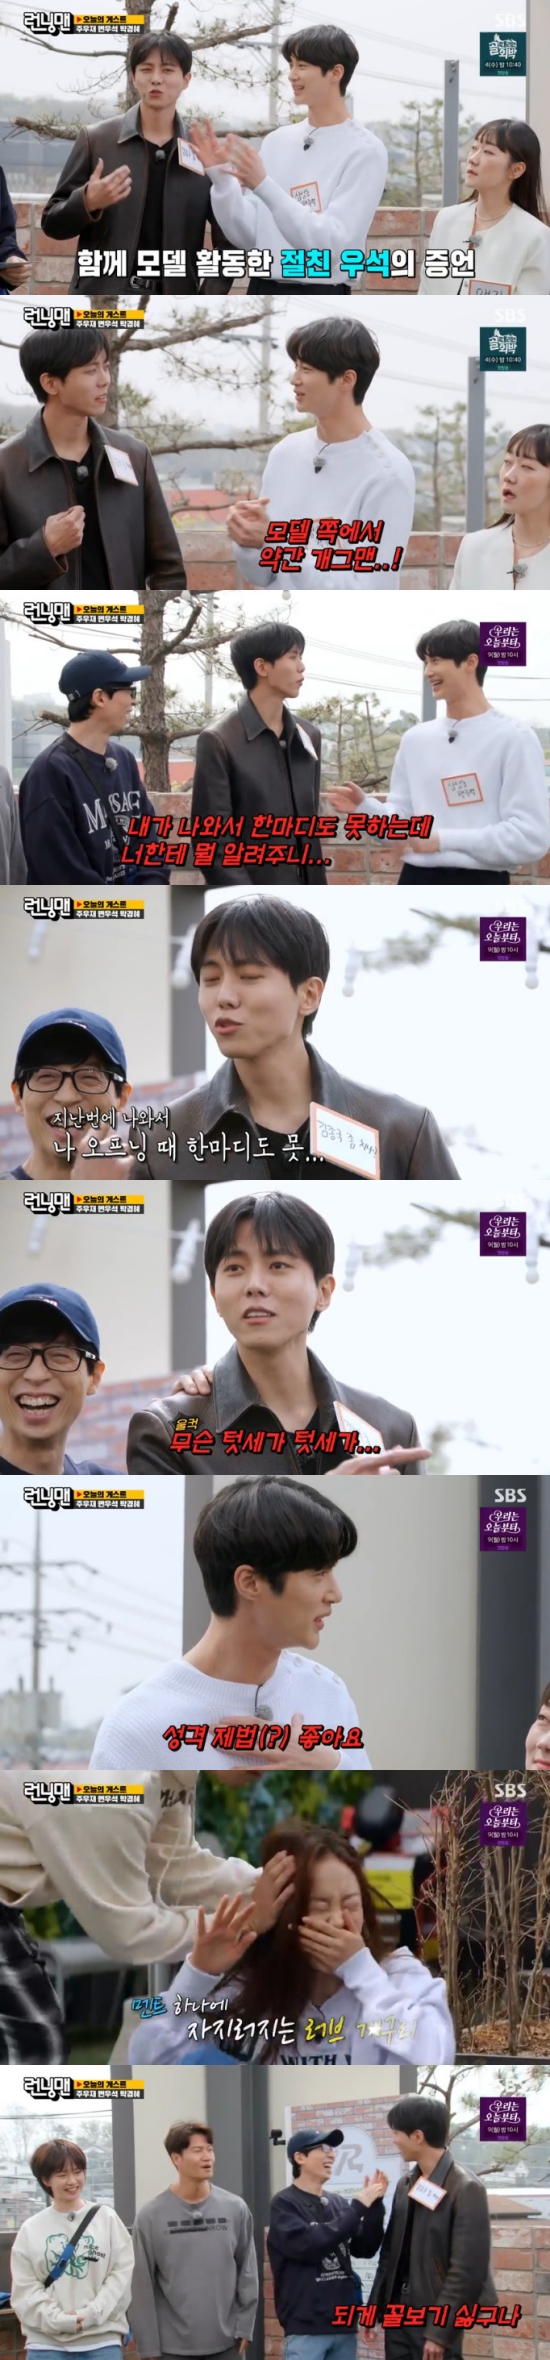 Model Joo Woo-jae complained about being compared to actor Nam Joo-hyuk.On SBS Running Man broadcasted on the 1st, Running Mon Race was decorated with Running Mon Race, and the scene where Joo Woo Jae, Woosok and Park Kyung Hye appeared as guests was broadcast.On this day, the members joked that Why did you come again and Did you come to the manager when Joo Woo-jae appeared as a guest.Yoo Jae-Suk said, Woo Jae can be said to have floated to some extent in earnest.We are the one who floated, and Joo Jae said, Do you really ask me after you appear here? Is it the model that did the real show?So I just say that it is not because I am troubled to explain. Kim Jong-kook asked, Do you get close to the models? And Ju Woo-jae insisted, It is the main axis.But Wooseok said, It feels like a comedian on the model side.Yoo Jae-Suk asked Wooseok, Did you ask Woojae that you were going to go out Running Man? Wooseok said, If you are a little brother, you will give me advice.I cant say a word because I came out, but I cant tell you what. I didnt say a word at the opening.Is not it too bad for the gardening? Haha and Yang Se-chan said, It is an interest. In particular, Jean So-min expressed his favor toward Wooseok, and Ji Suk-jin asked, Is not it popular?Wooseok confessed, Its not that much more than I thought, and Ji Suk-jin wondered, I do not have a good personality.Wooseok boasted that he was good at character, and Jean So-min laughed a little overly, saying it was too fun.The members teased that Jean So-min was favorable to Wooseok, and Joo Jae said, I do not want to see you.In addition, during the Mission, the members talked about various debates that gathered recent topics.At this time, the production team prepared the question Is it okay for my boyfriend to prepare an event for a month with my friend? And Wooseok was okay.The members asked if it was okay for Ju Woo Jae to prepare an event with his girlfriend, and Woosok said, If you are a righteous brother, it is okay.Kim Jong-kook said, It is not a righteousness. Do not be a righteousness, but a good difficulty. He said, Is it Nam Ju-hyuk again?Photo = SBS broadcast screen